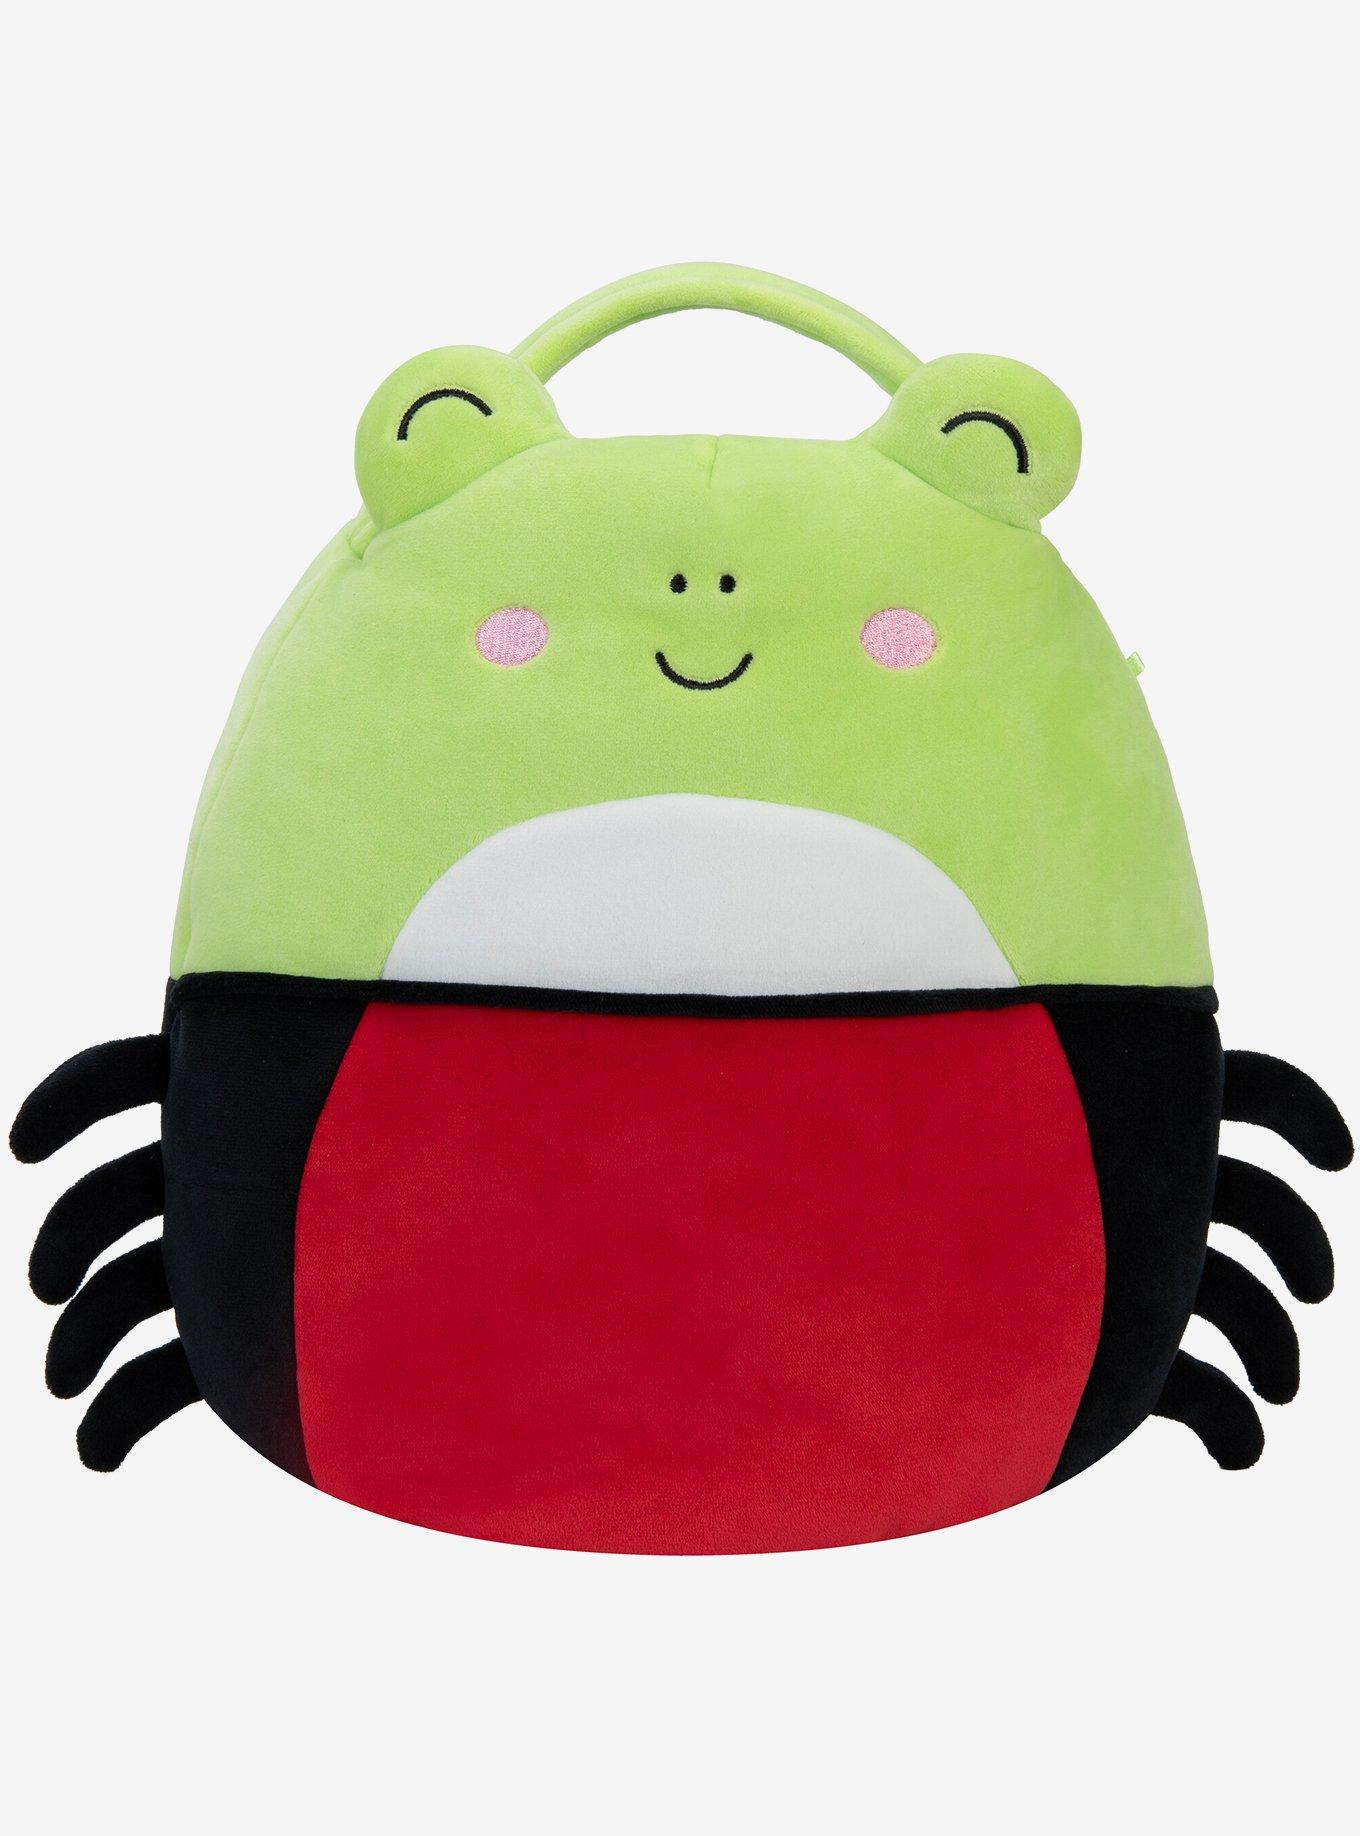 Squishmallows Wendy the Spider Frog Treat Pail